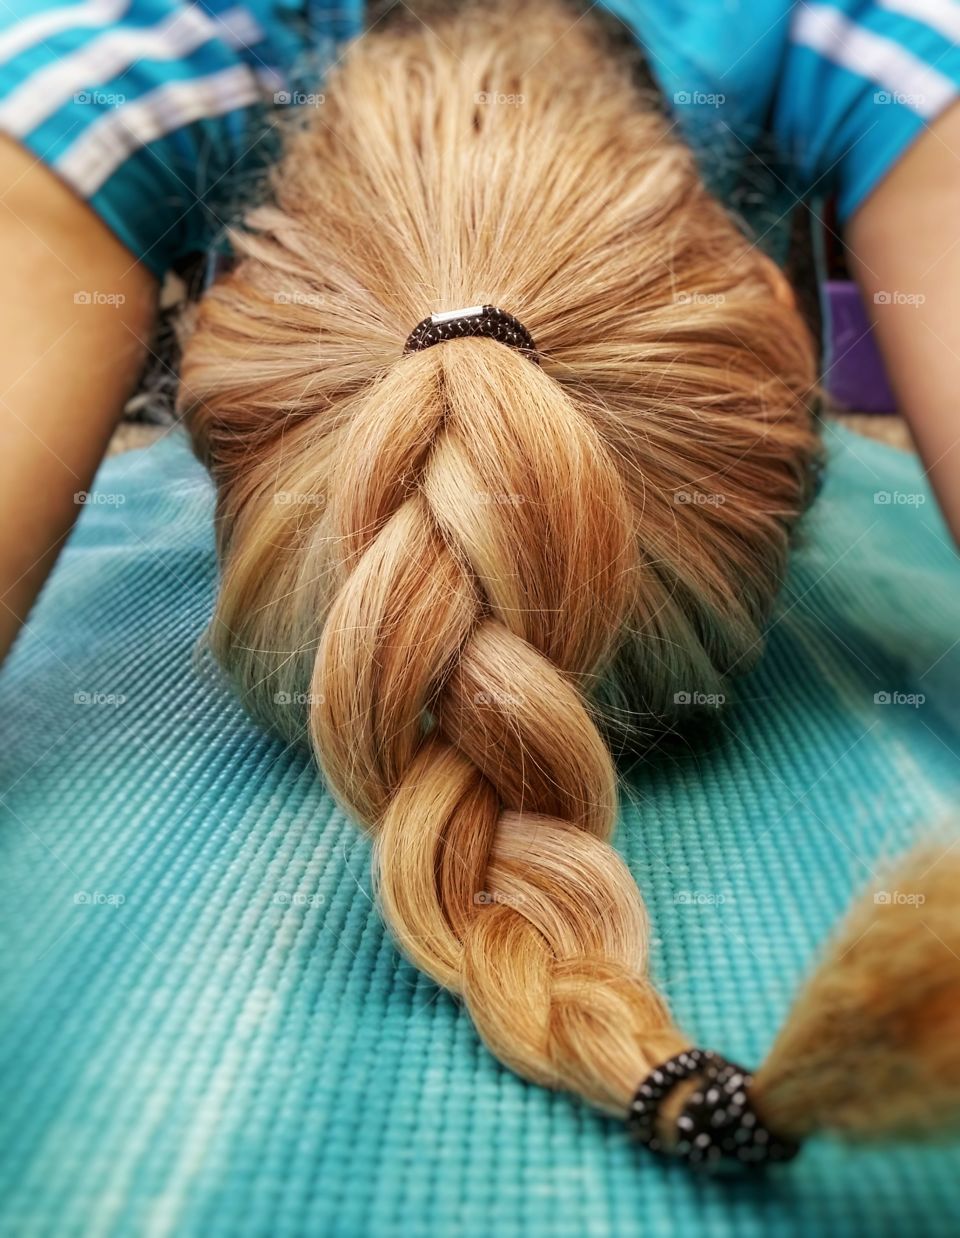 Staying in good shape with yoga child's pose a woman with blond braided hair close up on a mat